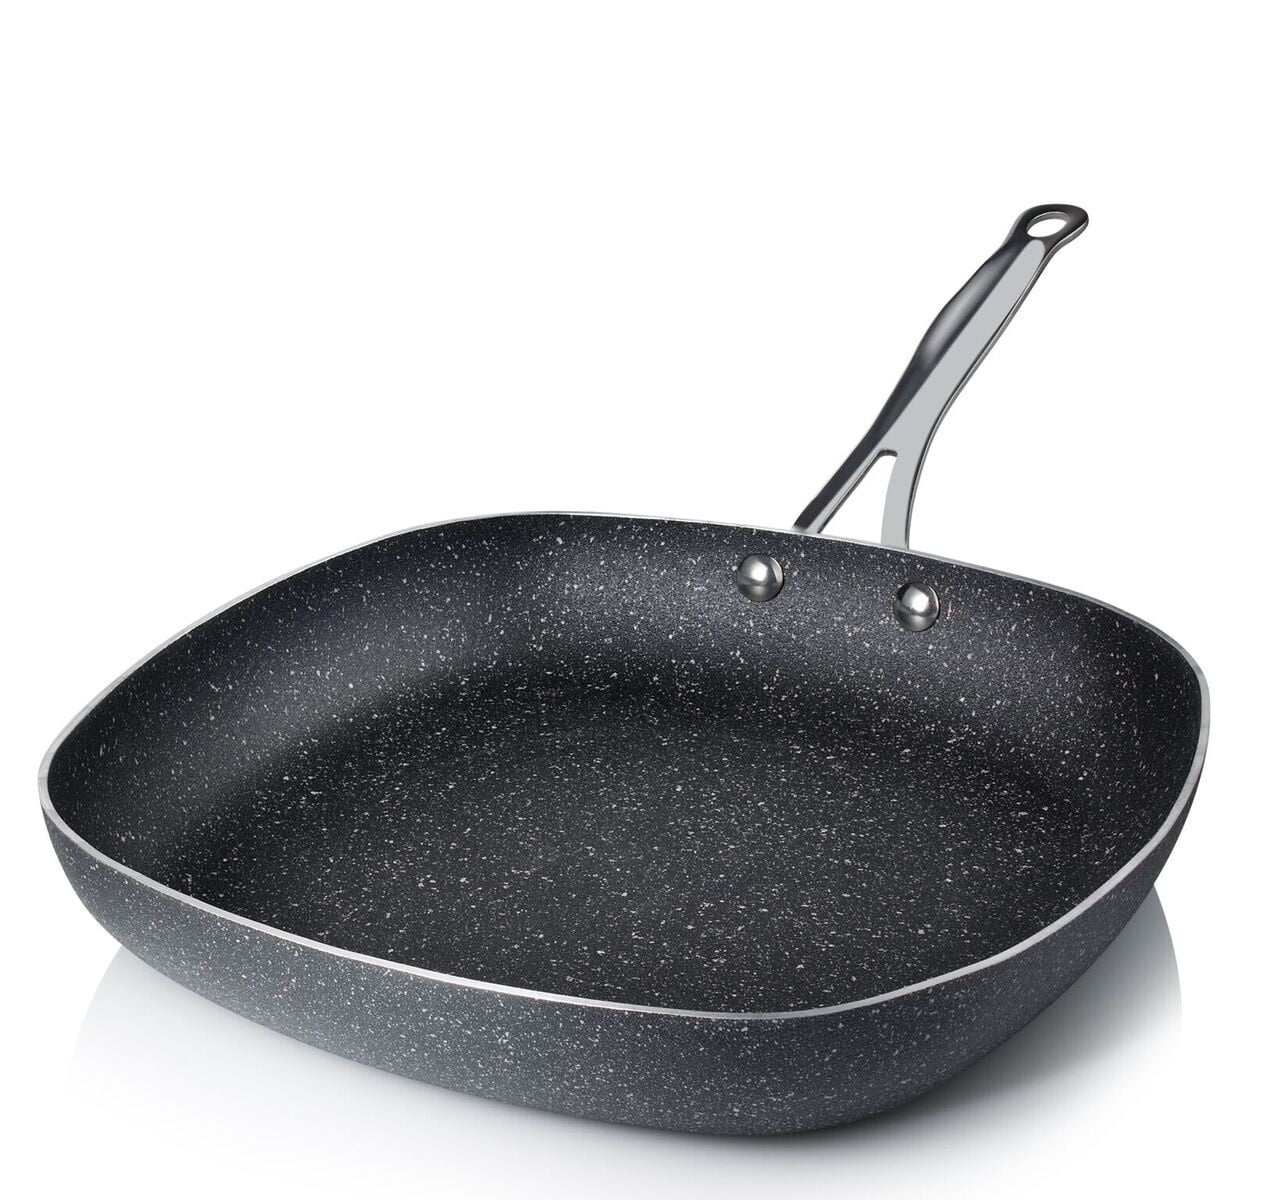 Granite Rock Mineral Enforced Non-Stick Square Frying Pan, 9.5